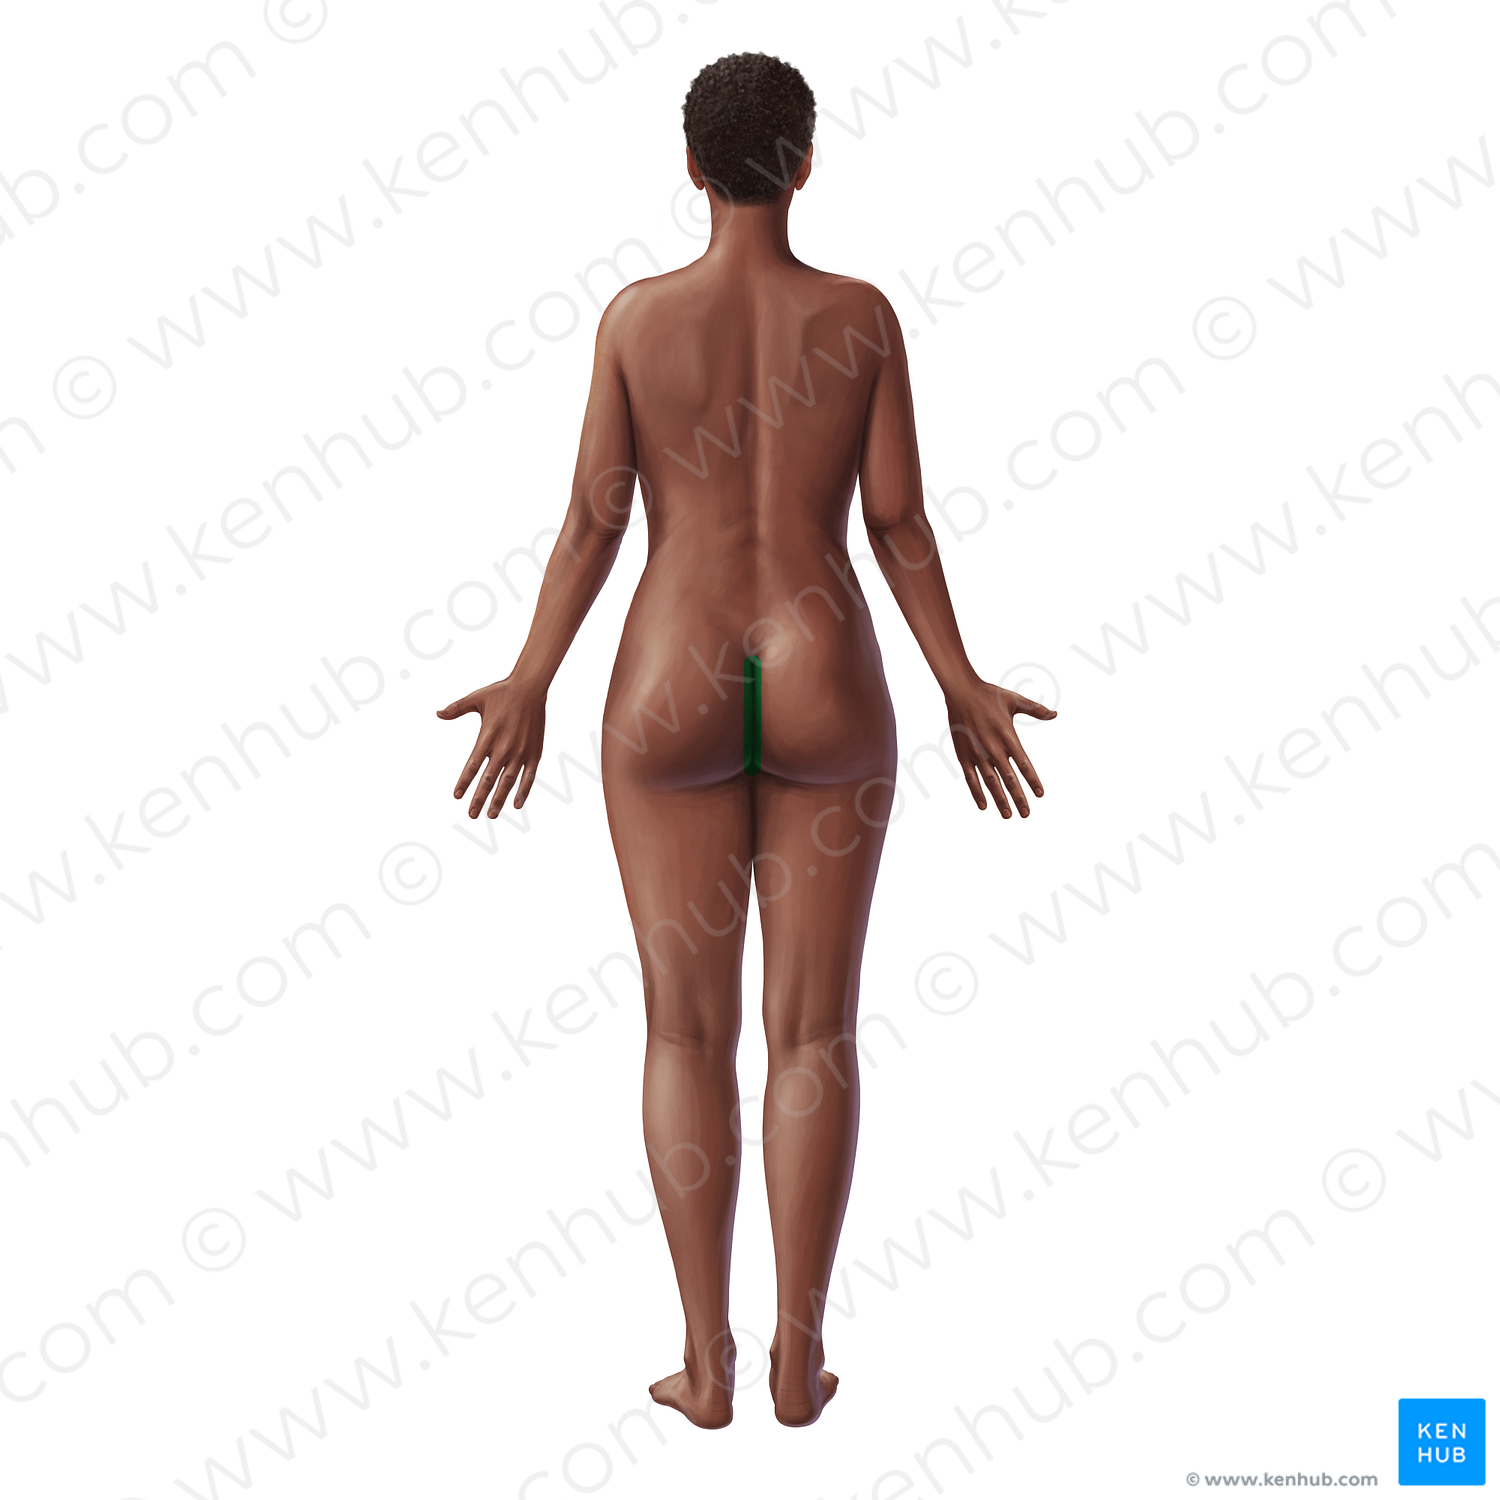 Intergluteal cleft (#20994)